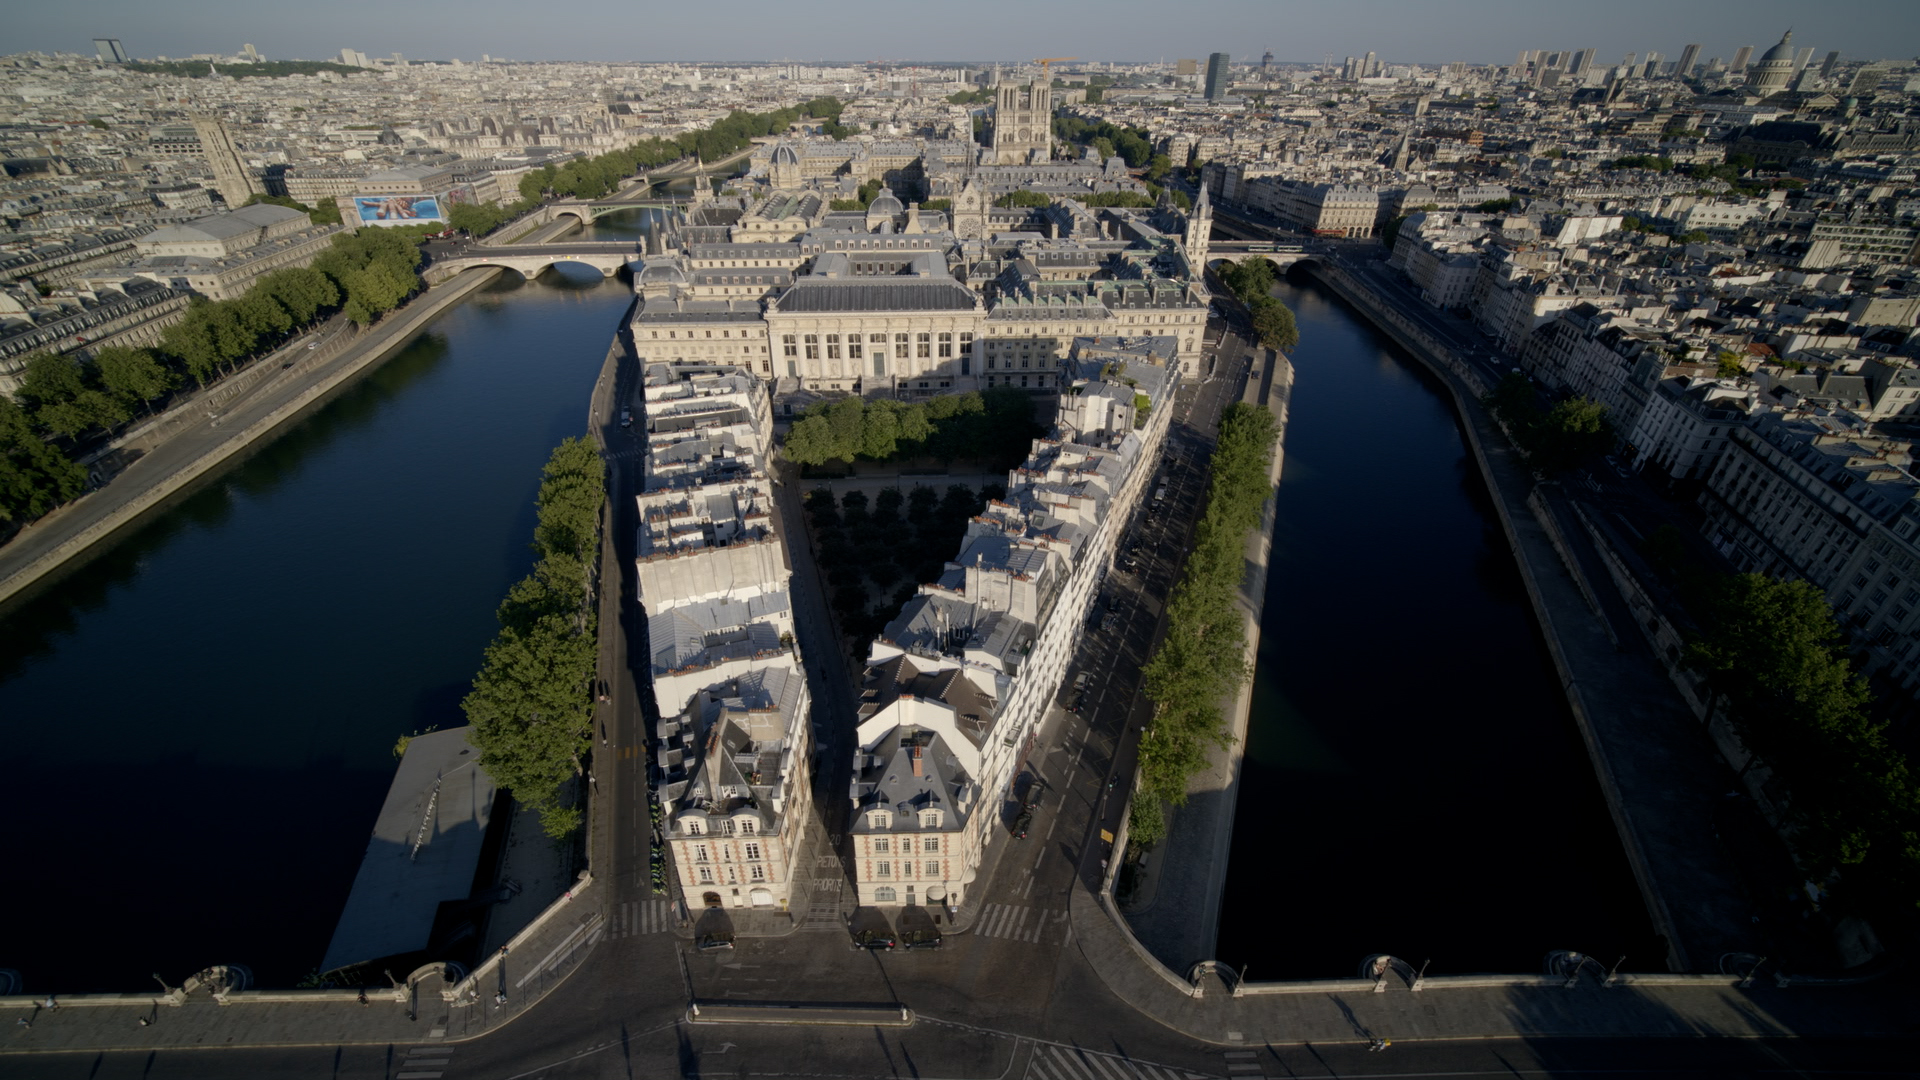 The mystery behind the spectacular palace in the heart of Paris which was built over by goverment buildings and erased from memory... until now.